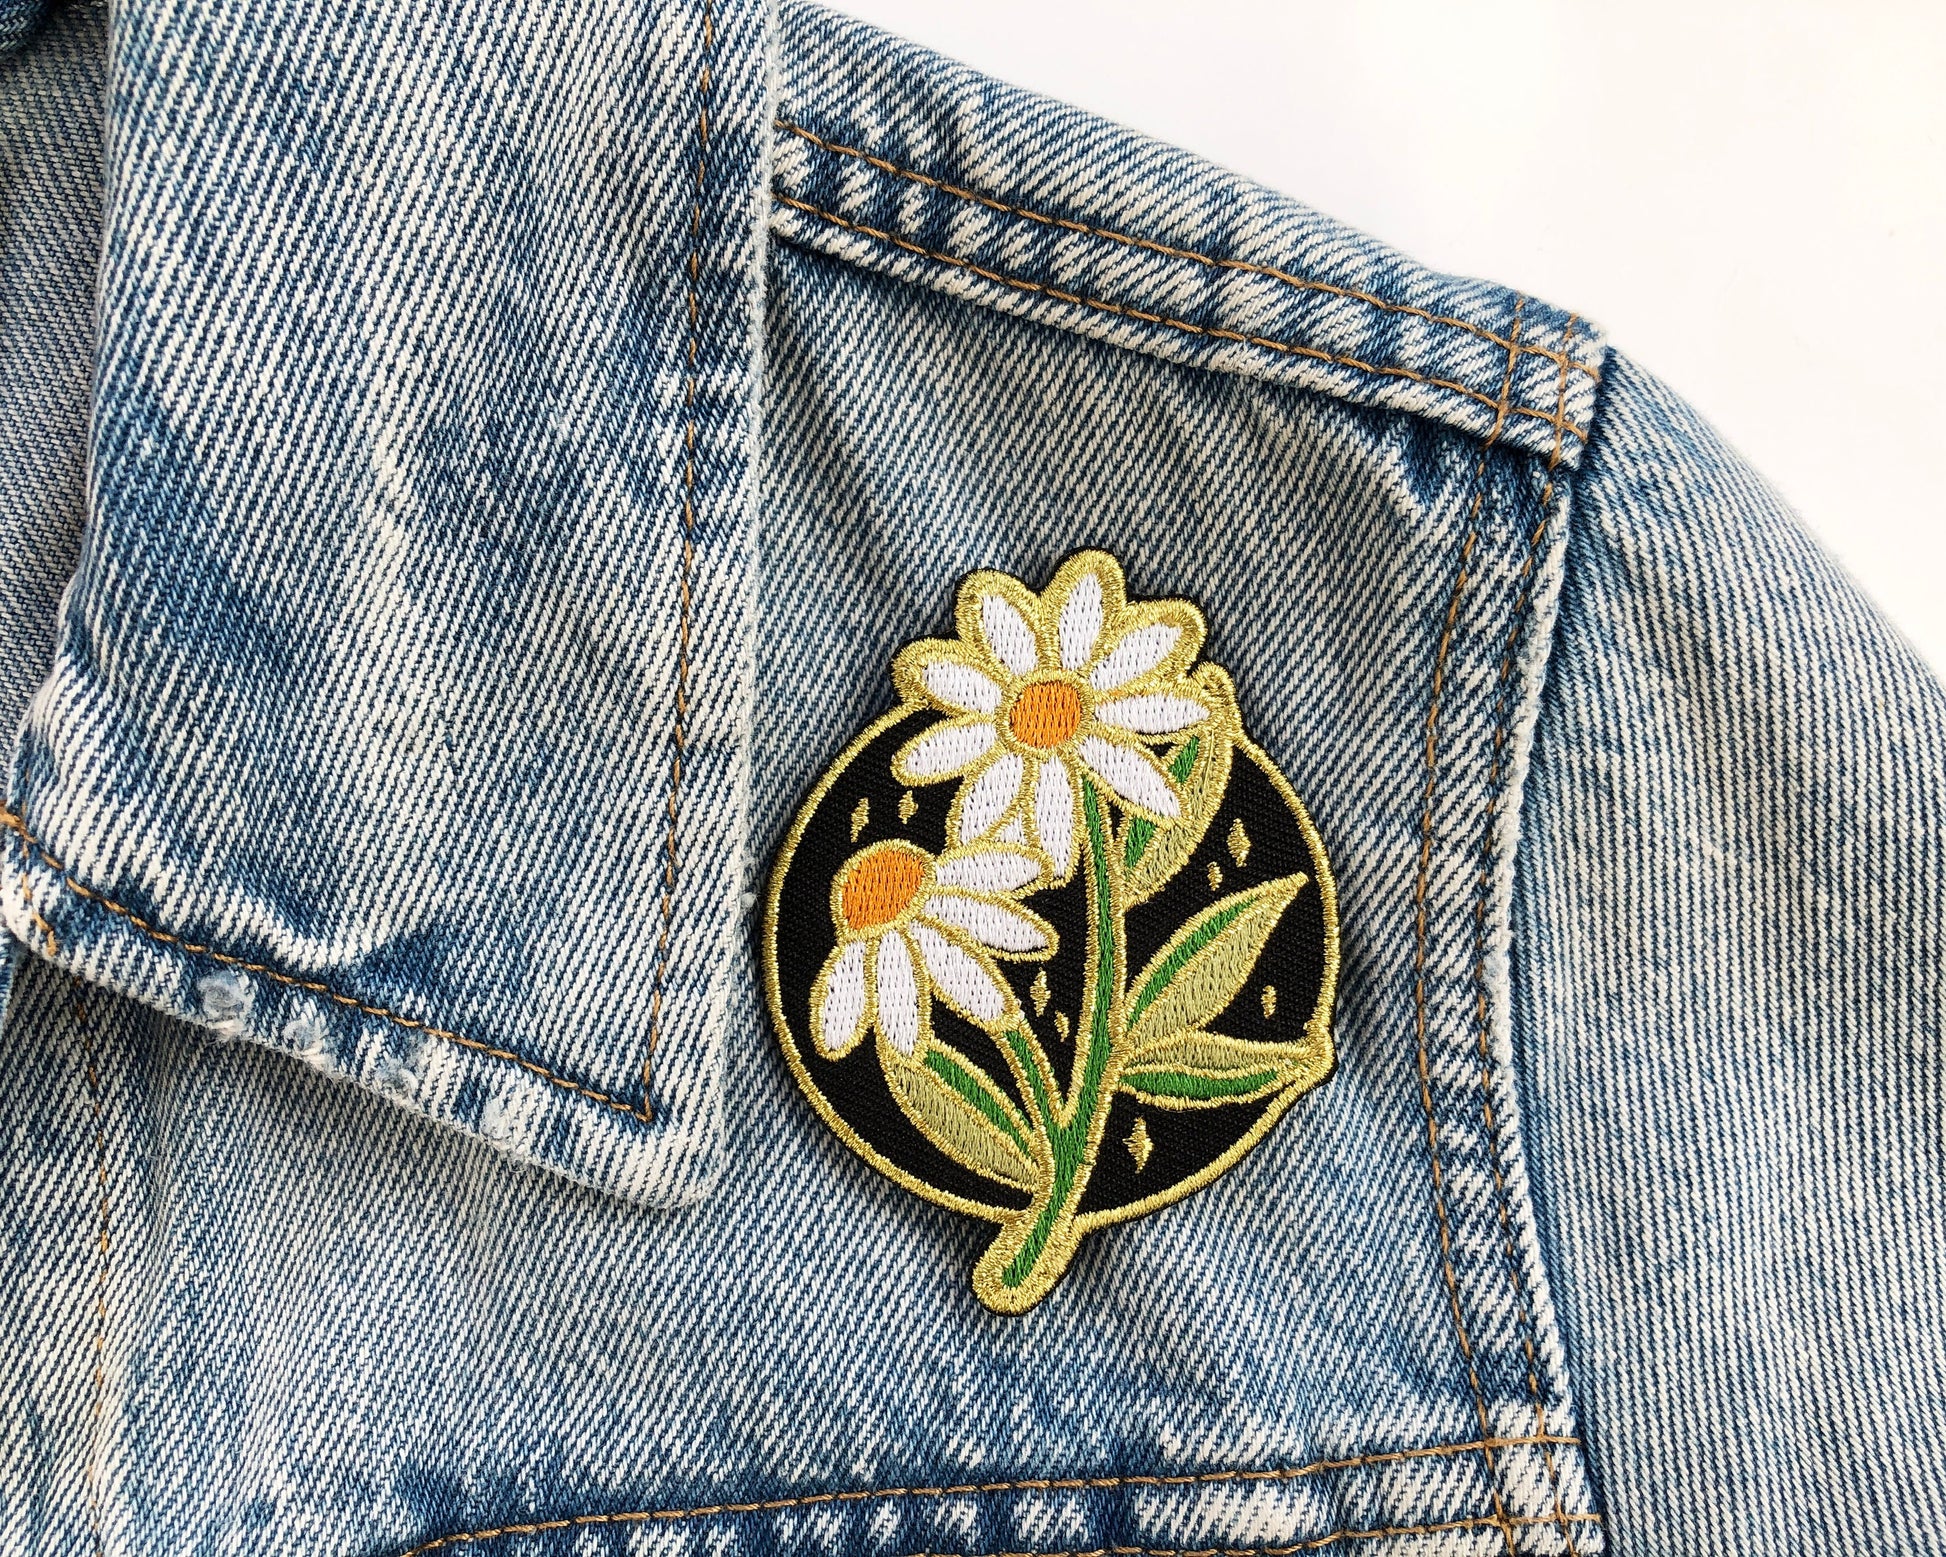 Blume - Daisies - Margerite - Flower- Patch - Back Patches